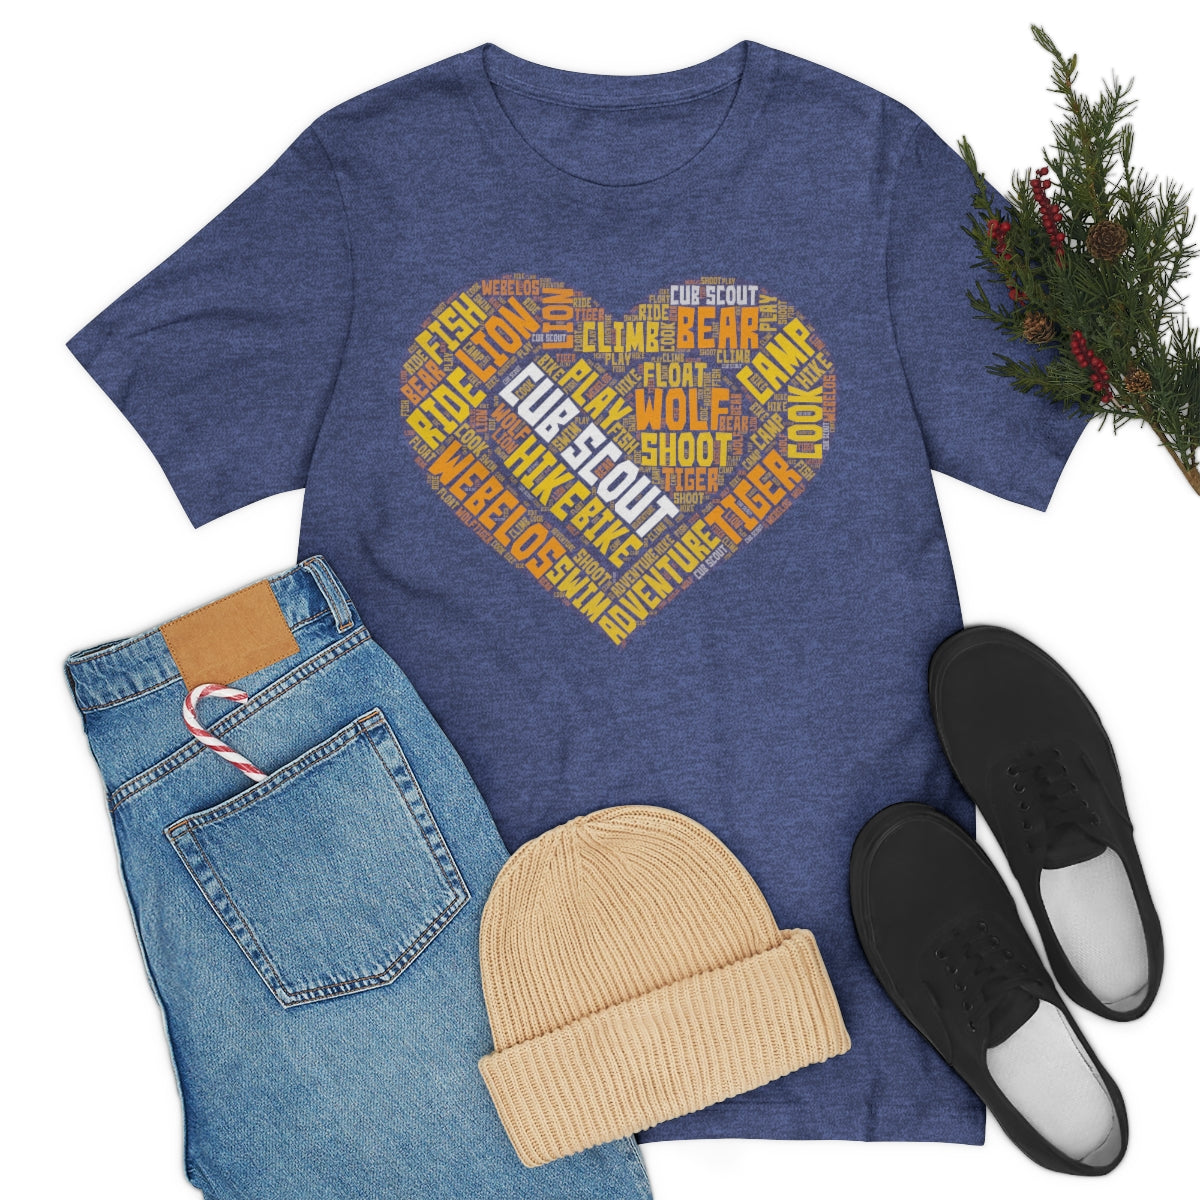 Cub Scout Heart Tee - Adult